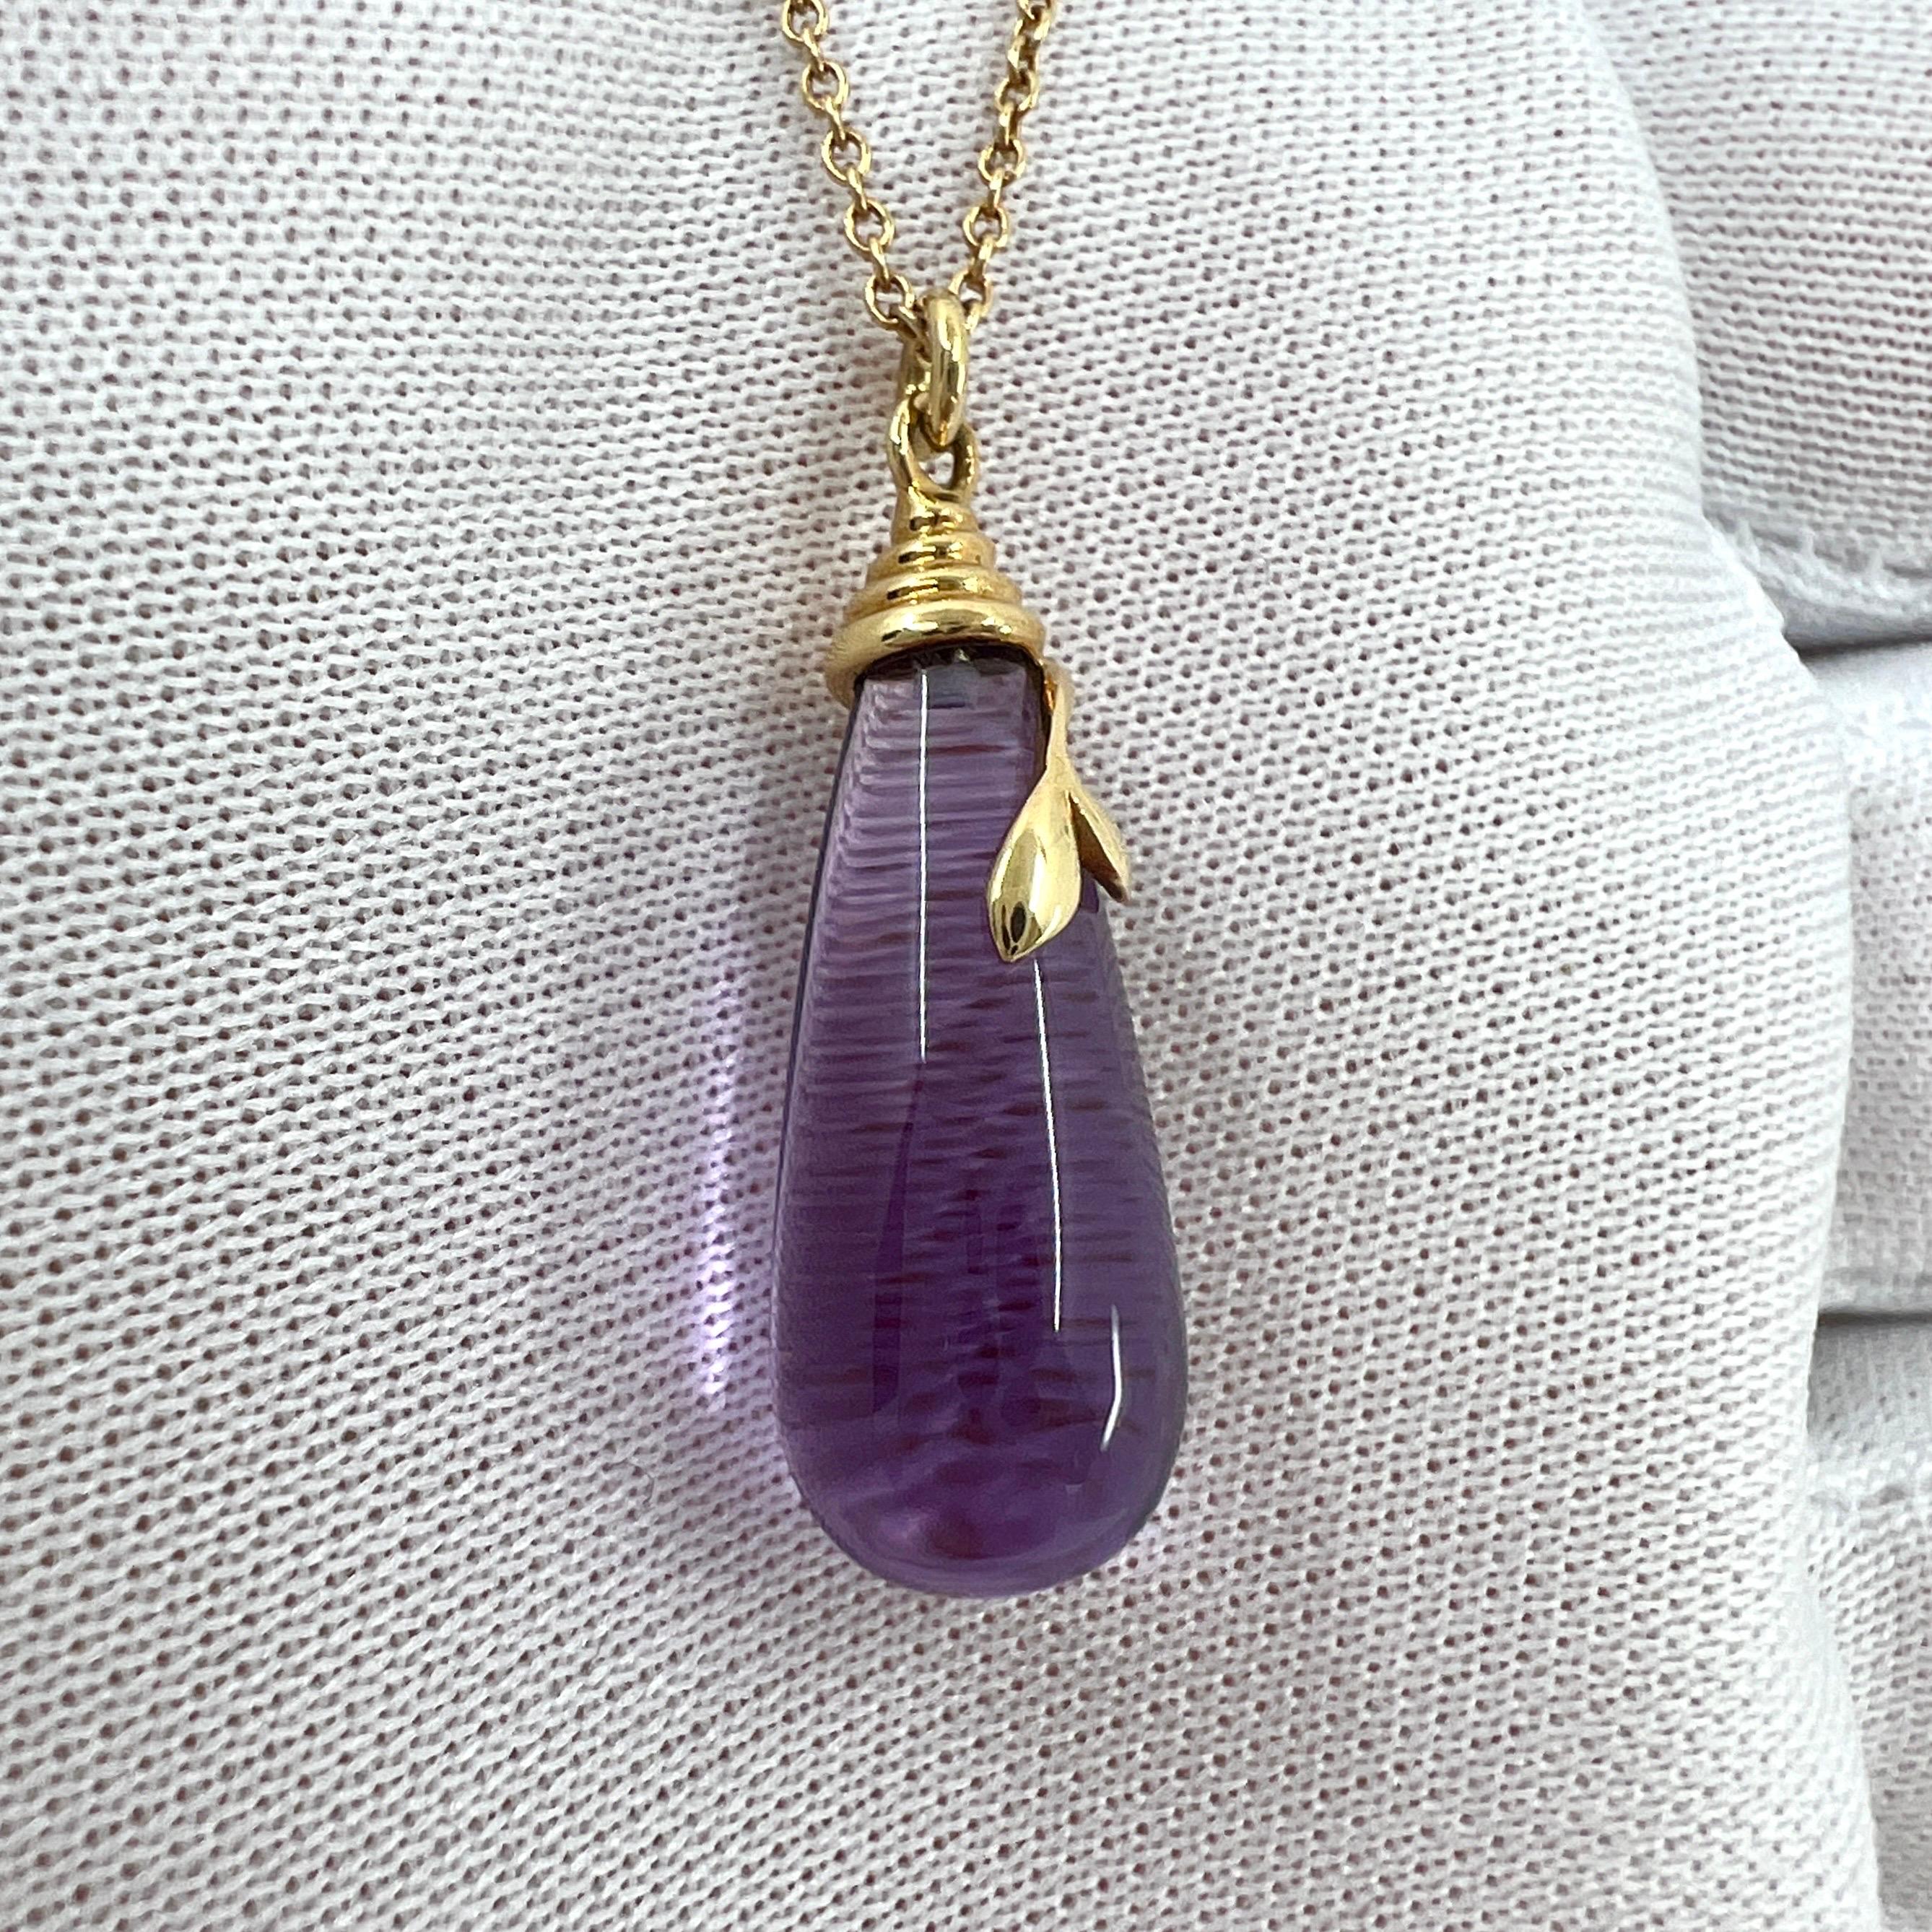 Rare Tiffany & Co. Paloma Picasso Olive Leaf Amethyst Gold Drop Pendant Necklace For Sale 2